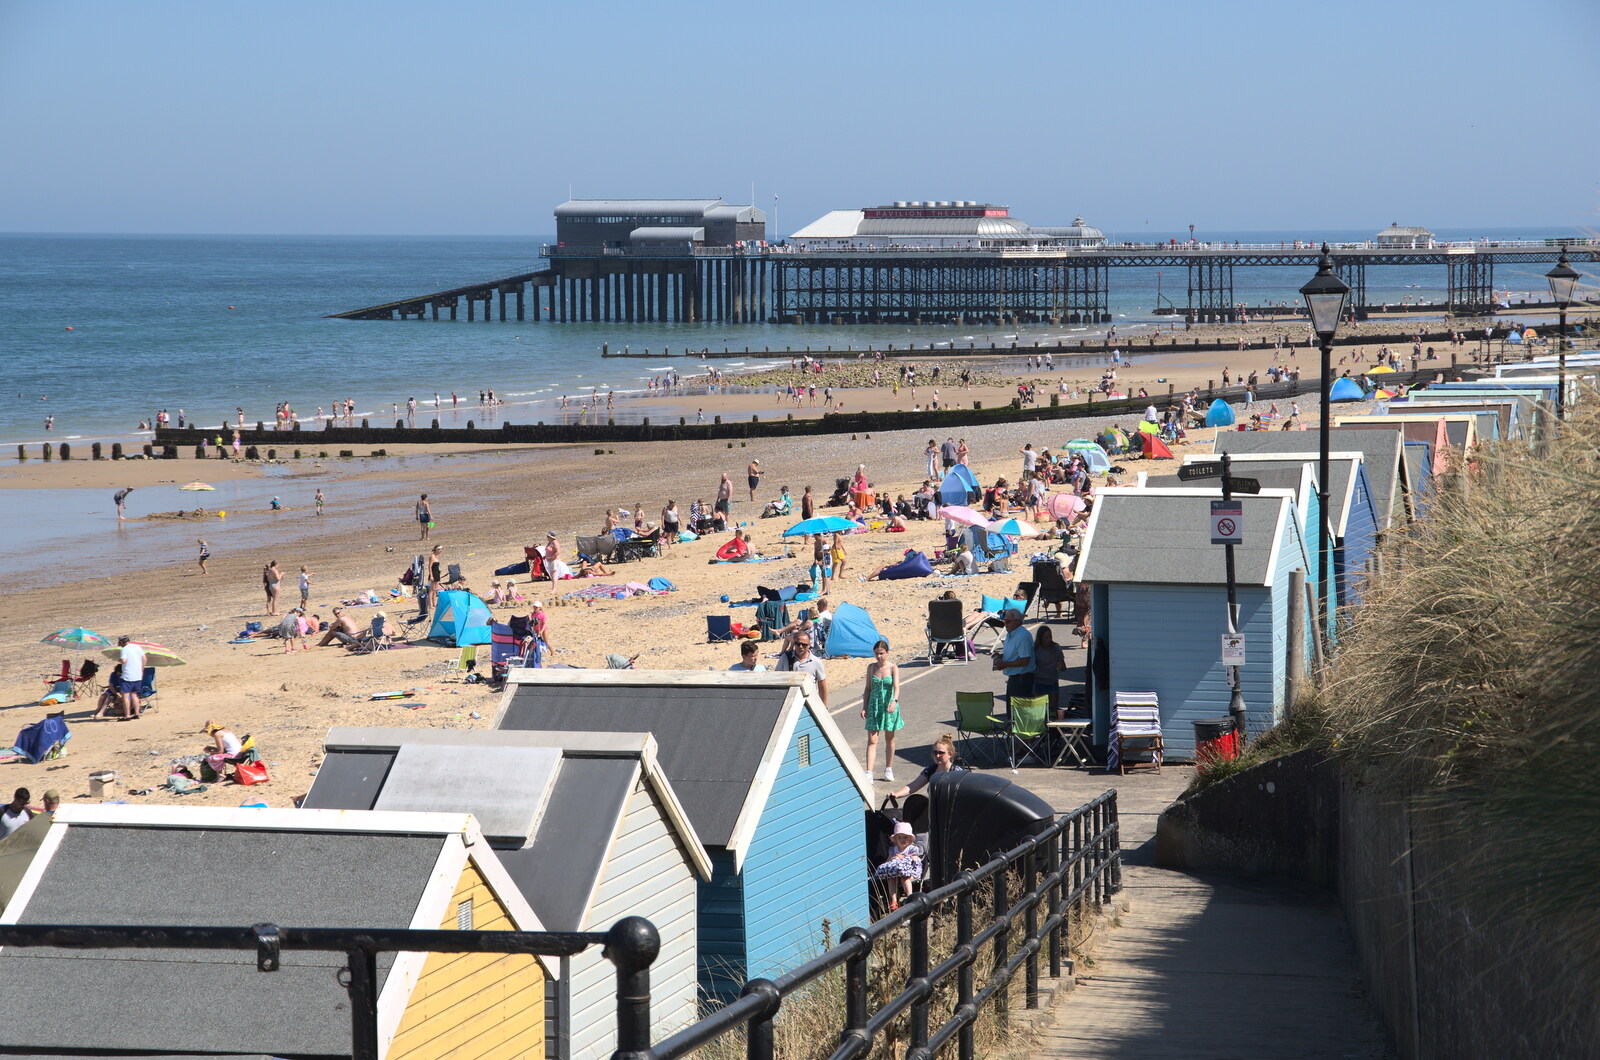 Cromer pier in the distance from Camping at Forest Park, Cromer, Norfolk - 12th August 2022